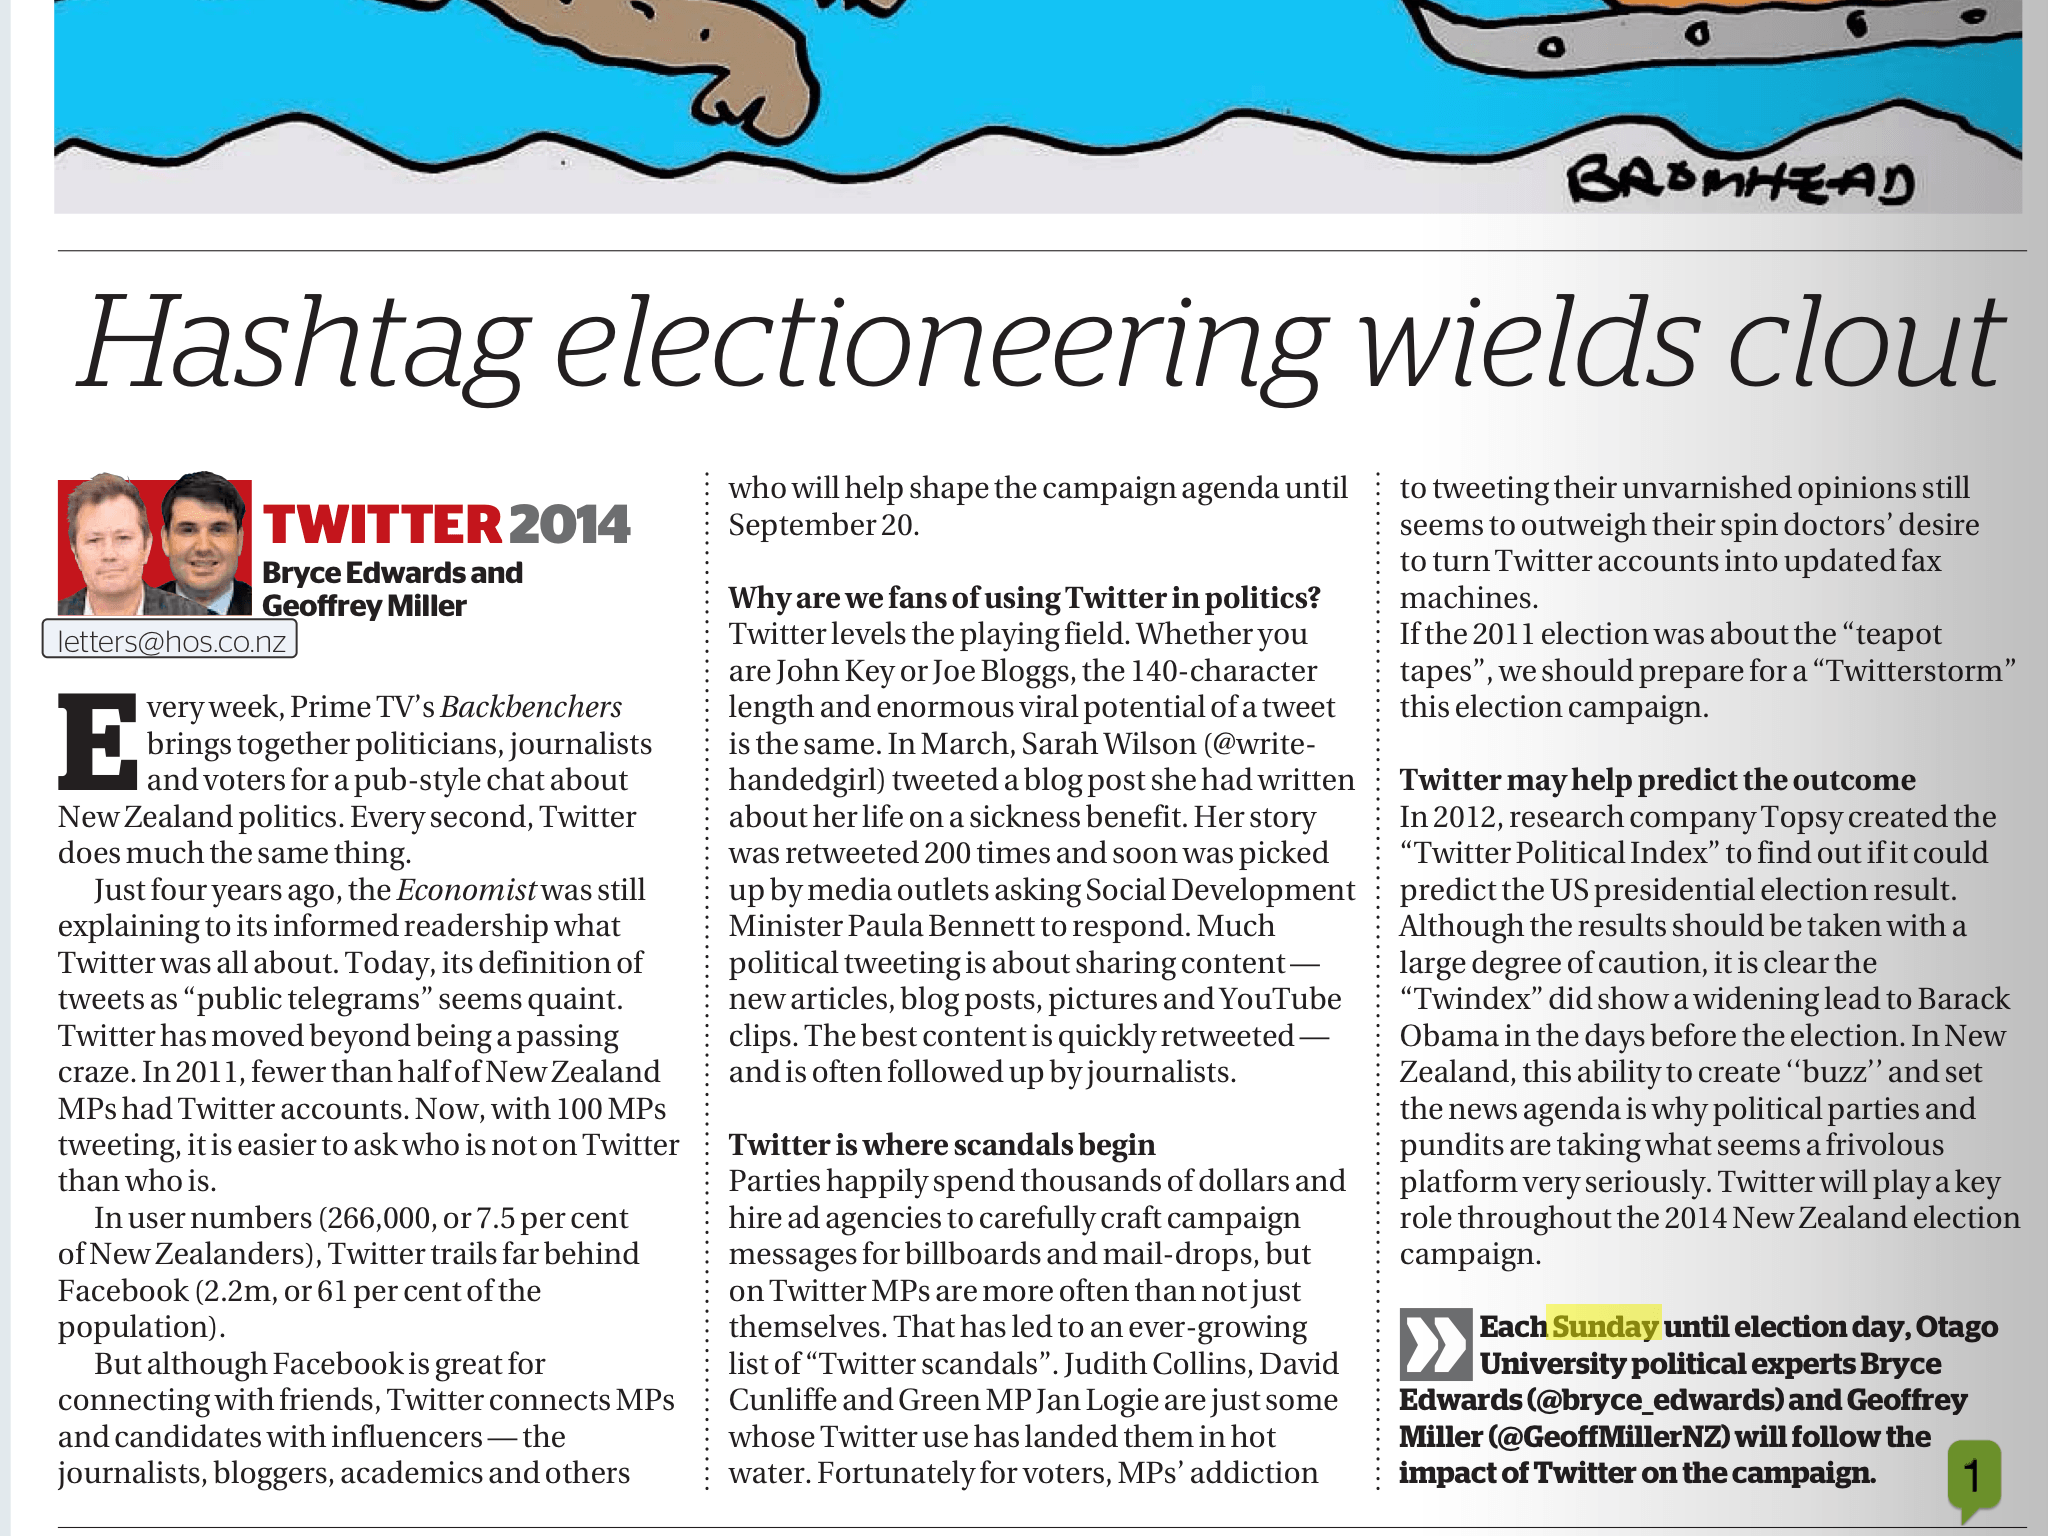 Hashtag electioneering wields clout